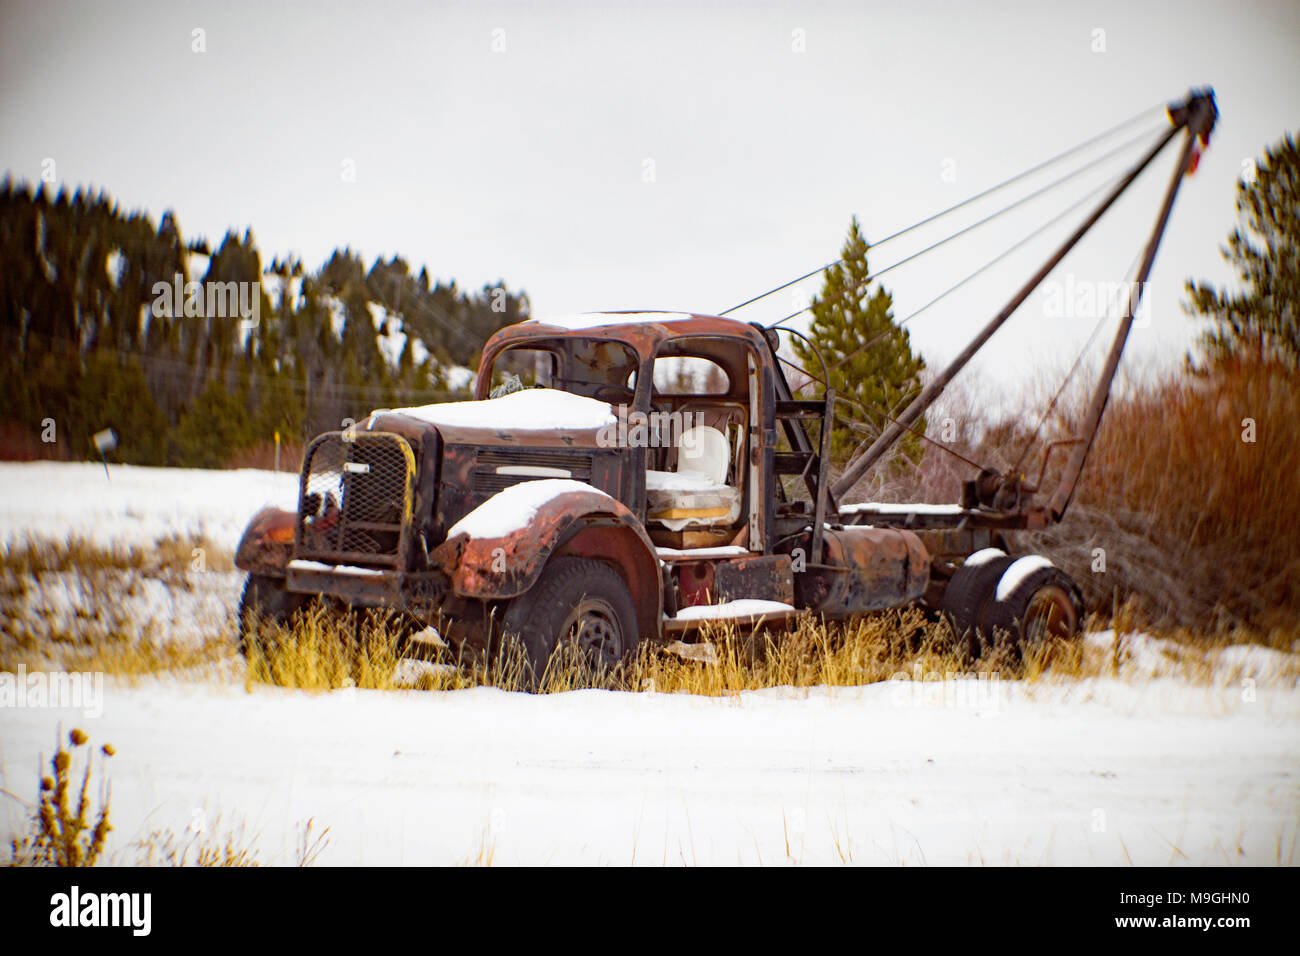 A 1947 White Super Power 2 1/2 ton pole truck in a snow-covered landscape near Silver Lake, Montana. Stock Photo